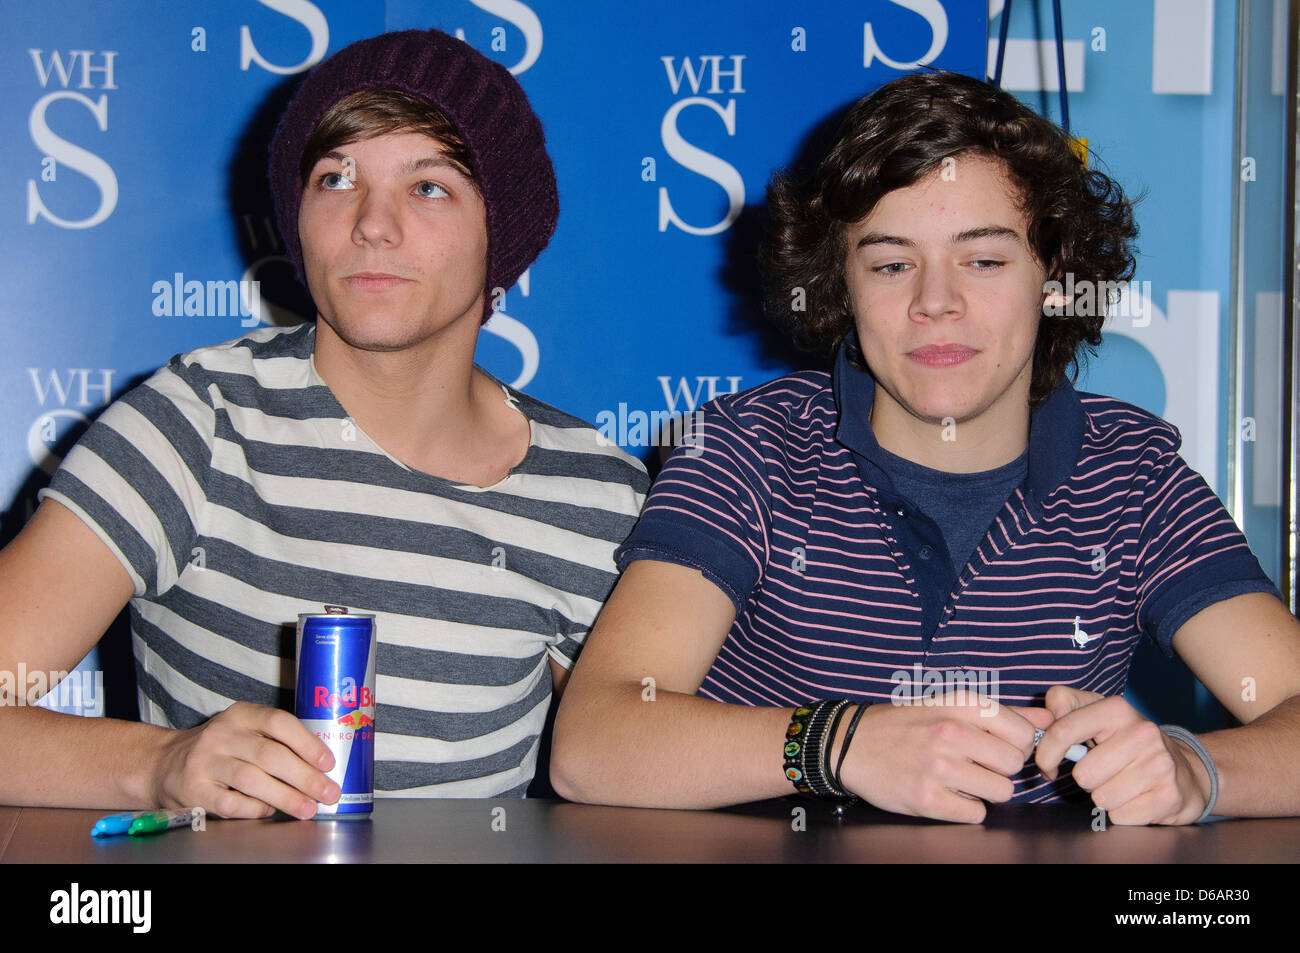 one direction, louis tomlinson and harry styles - image #6945073